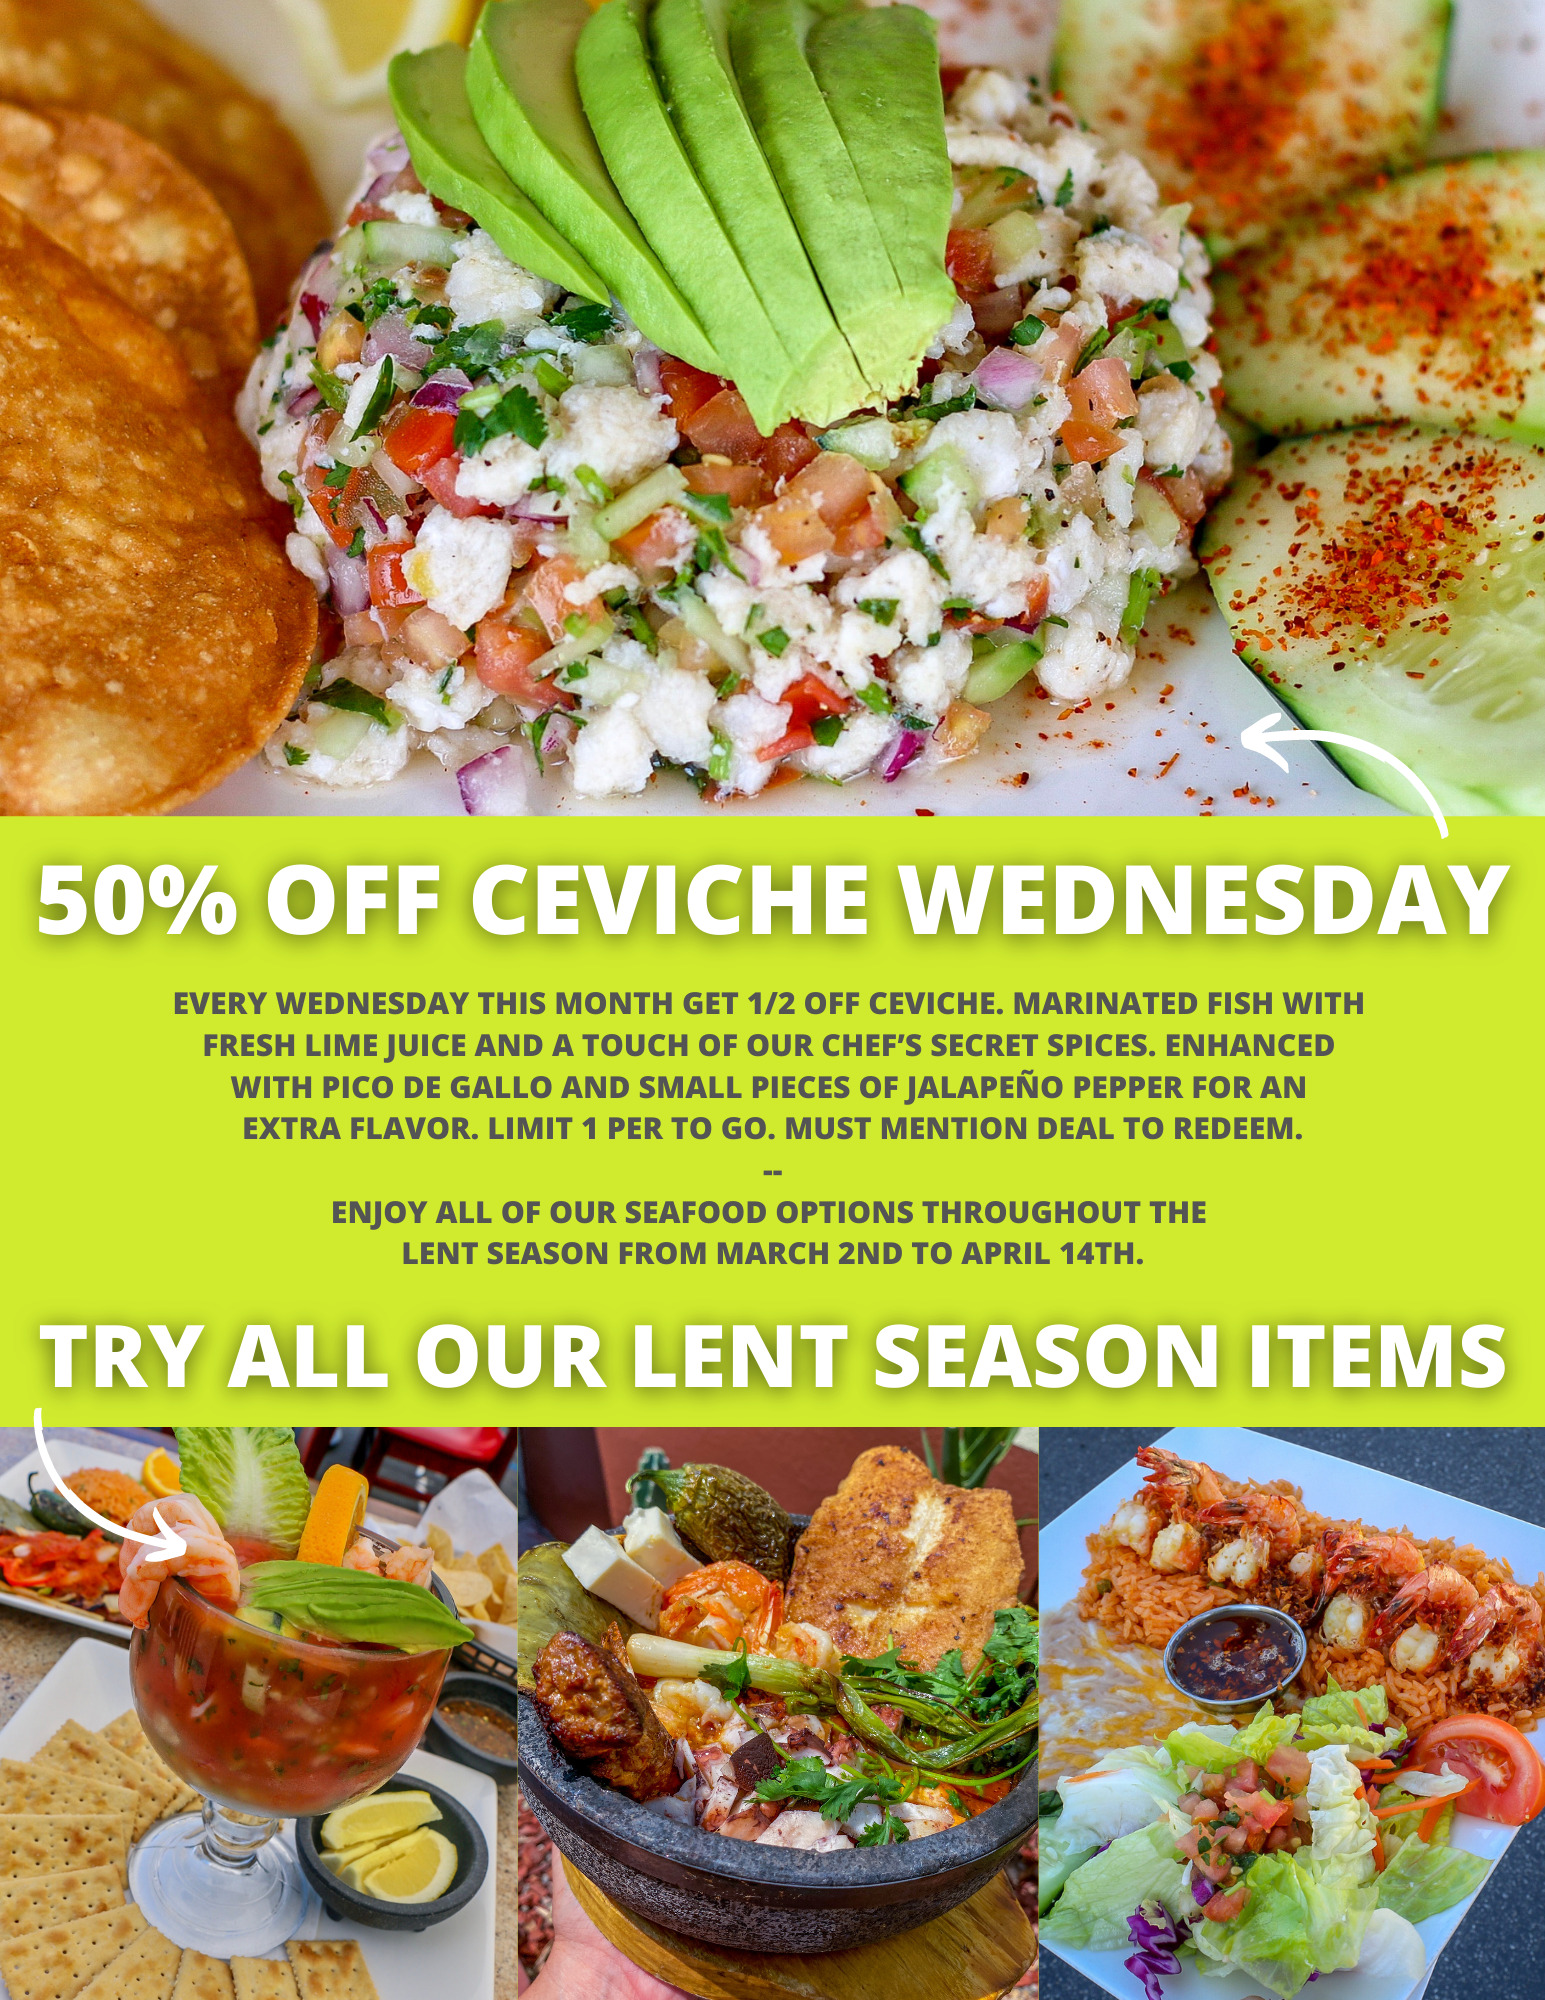 Cabrera's 50% off ceviche Wednesday special flyer showing ceviche